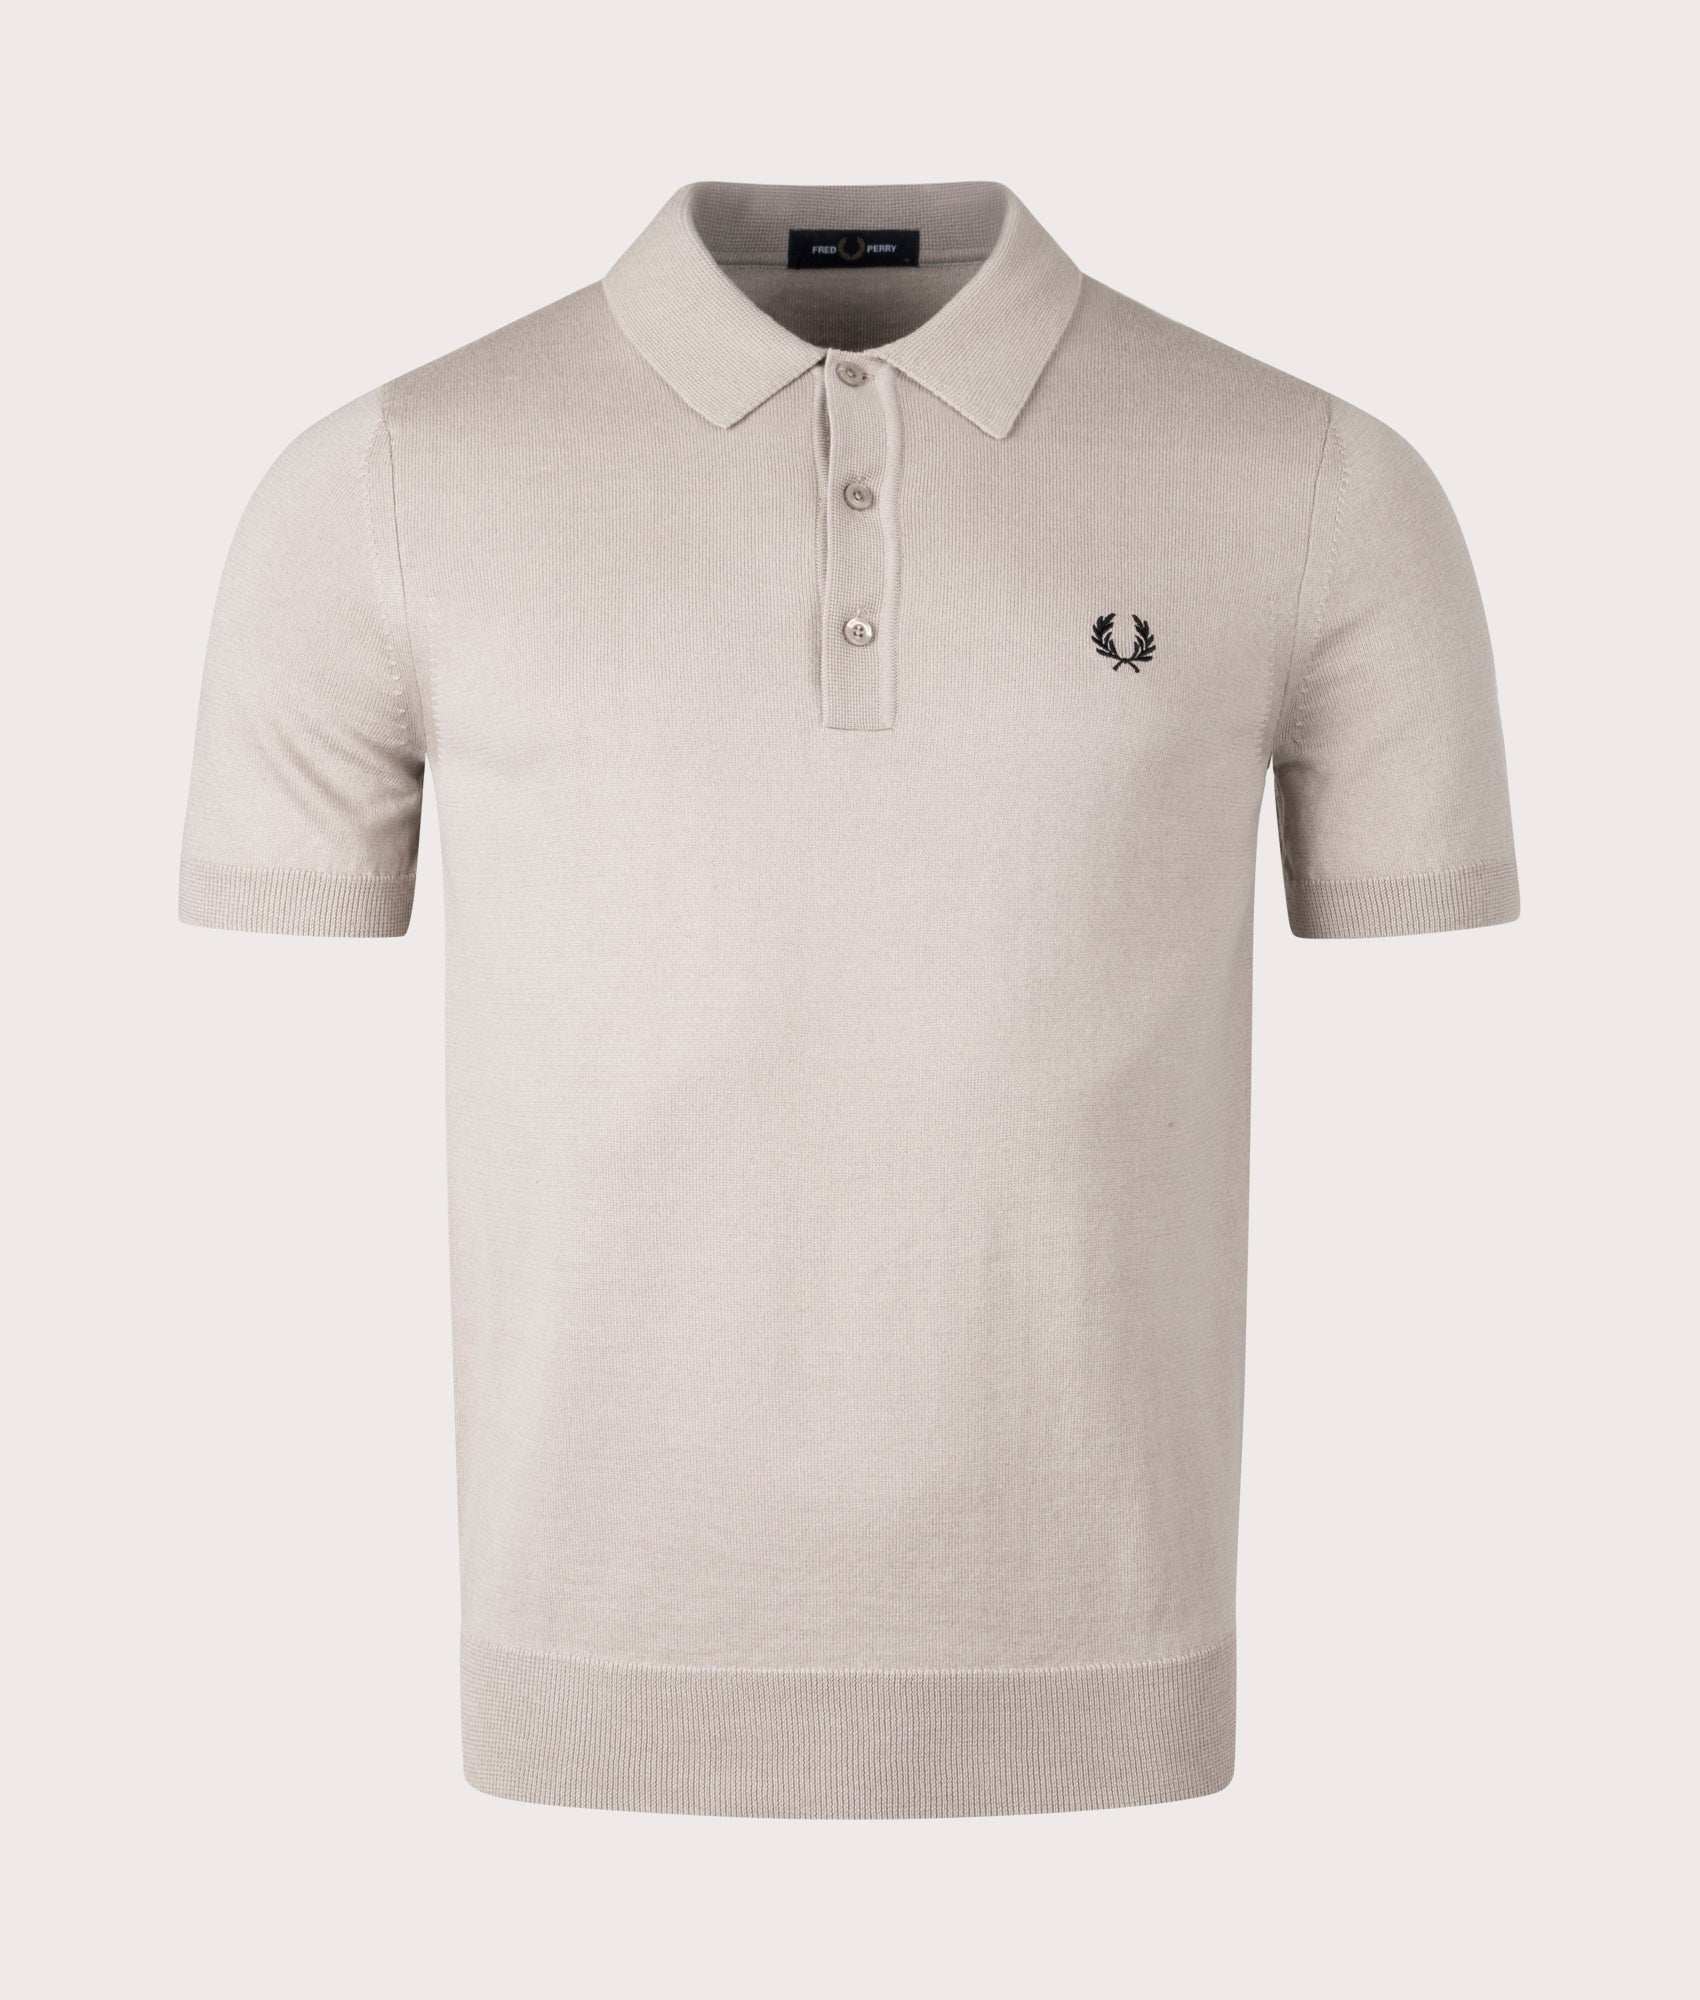 Fred Perry Mens Classic Knitted Polo Shirt - Colour: S56 Dark Oatmeal - Size: XL